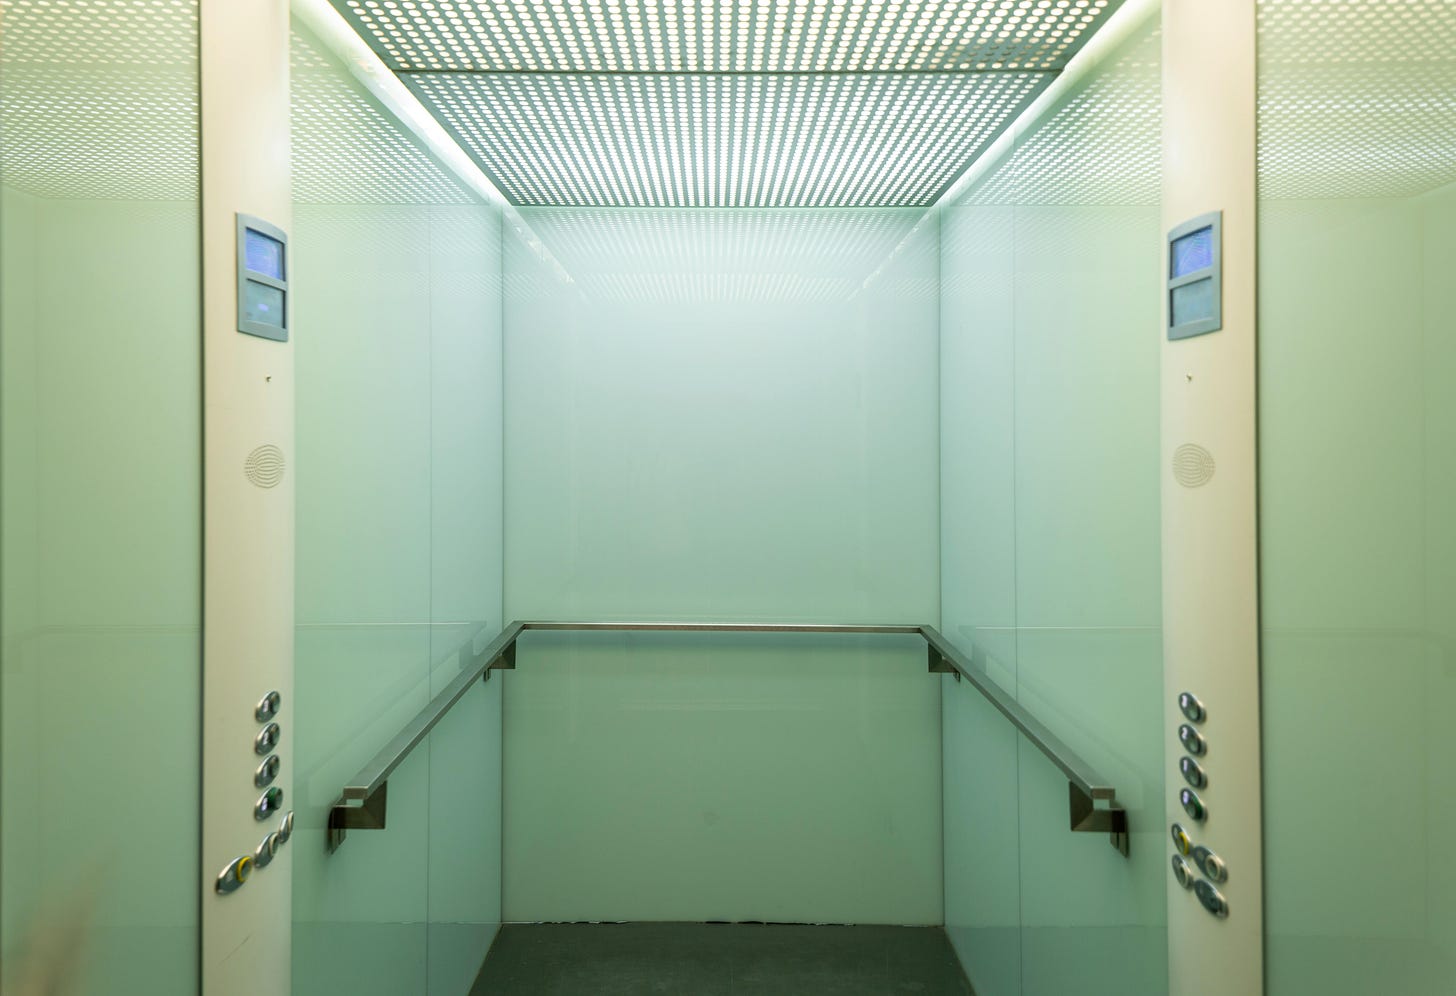 The inside of an empty elevator. The walls are lime green with yellow control panels.